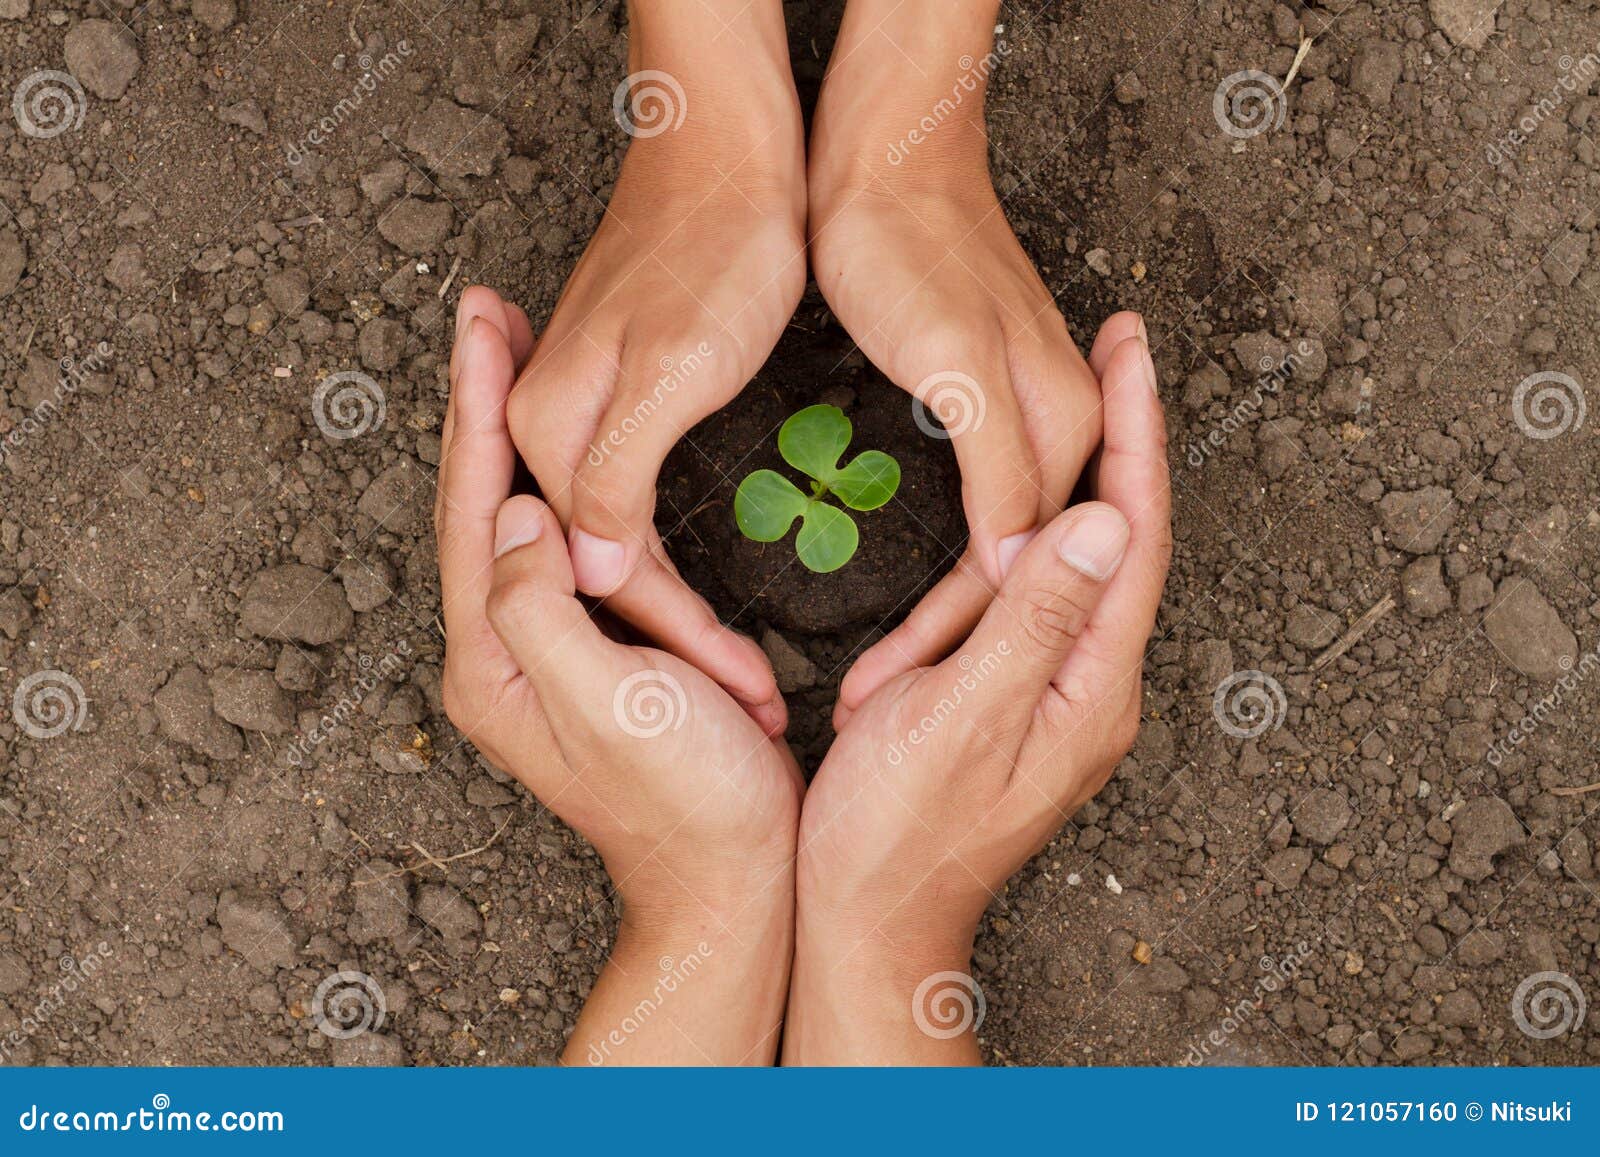 hands are protect a small tree or plant grow on soil